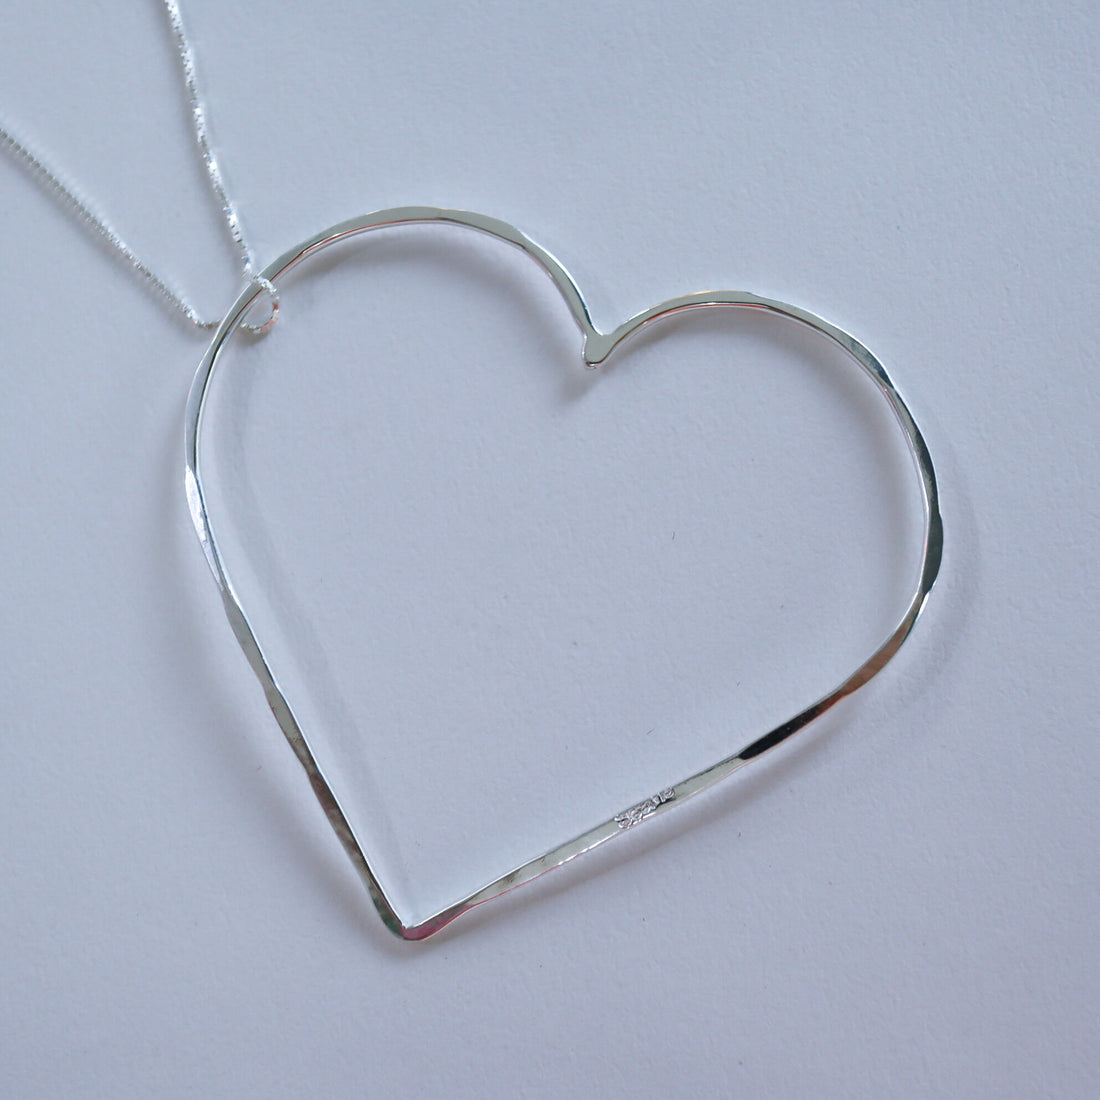 SEE ME  ALMA OPEN HEART NECKLACE